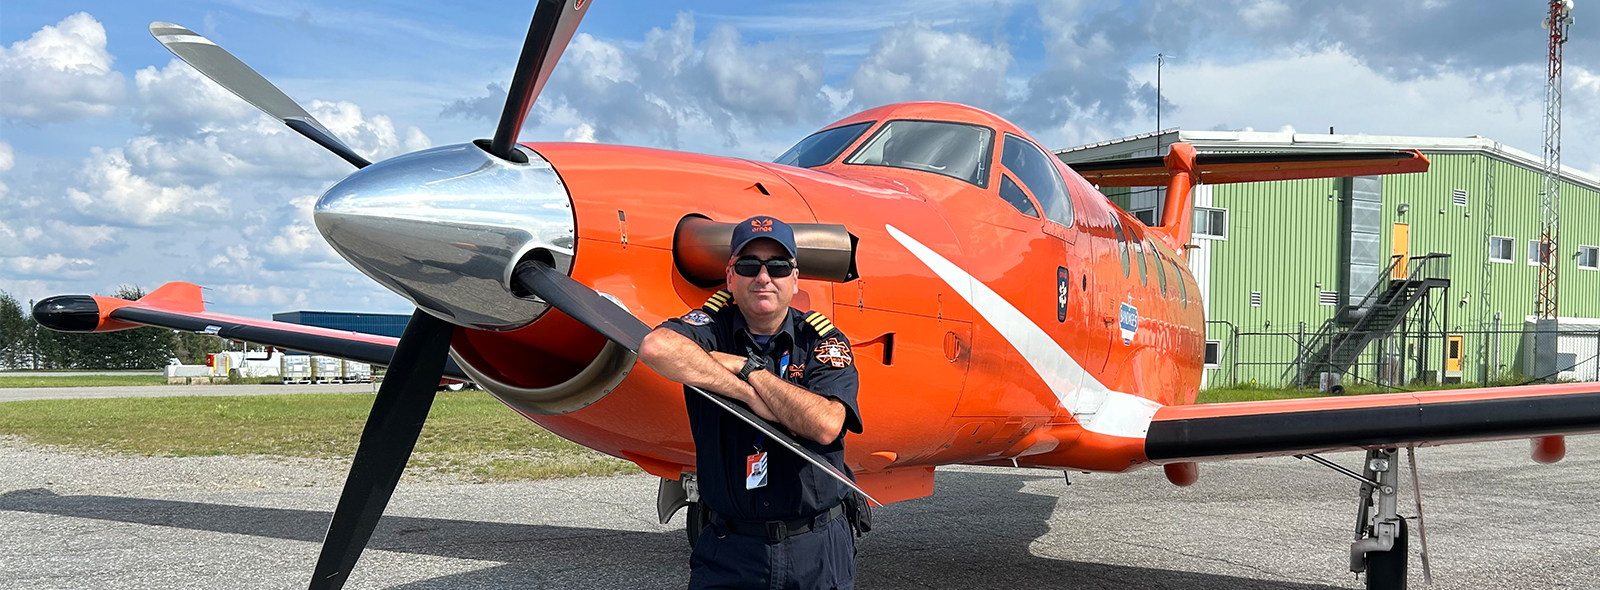 A picture of Captain Aaron Grubin leaning on the propeller of an Ornge Plane